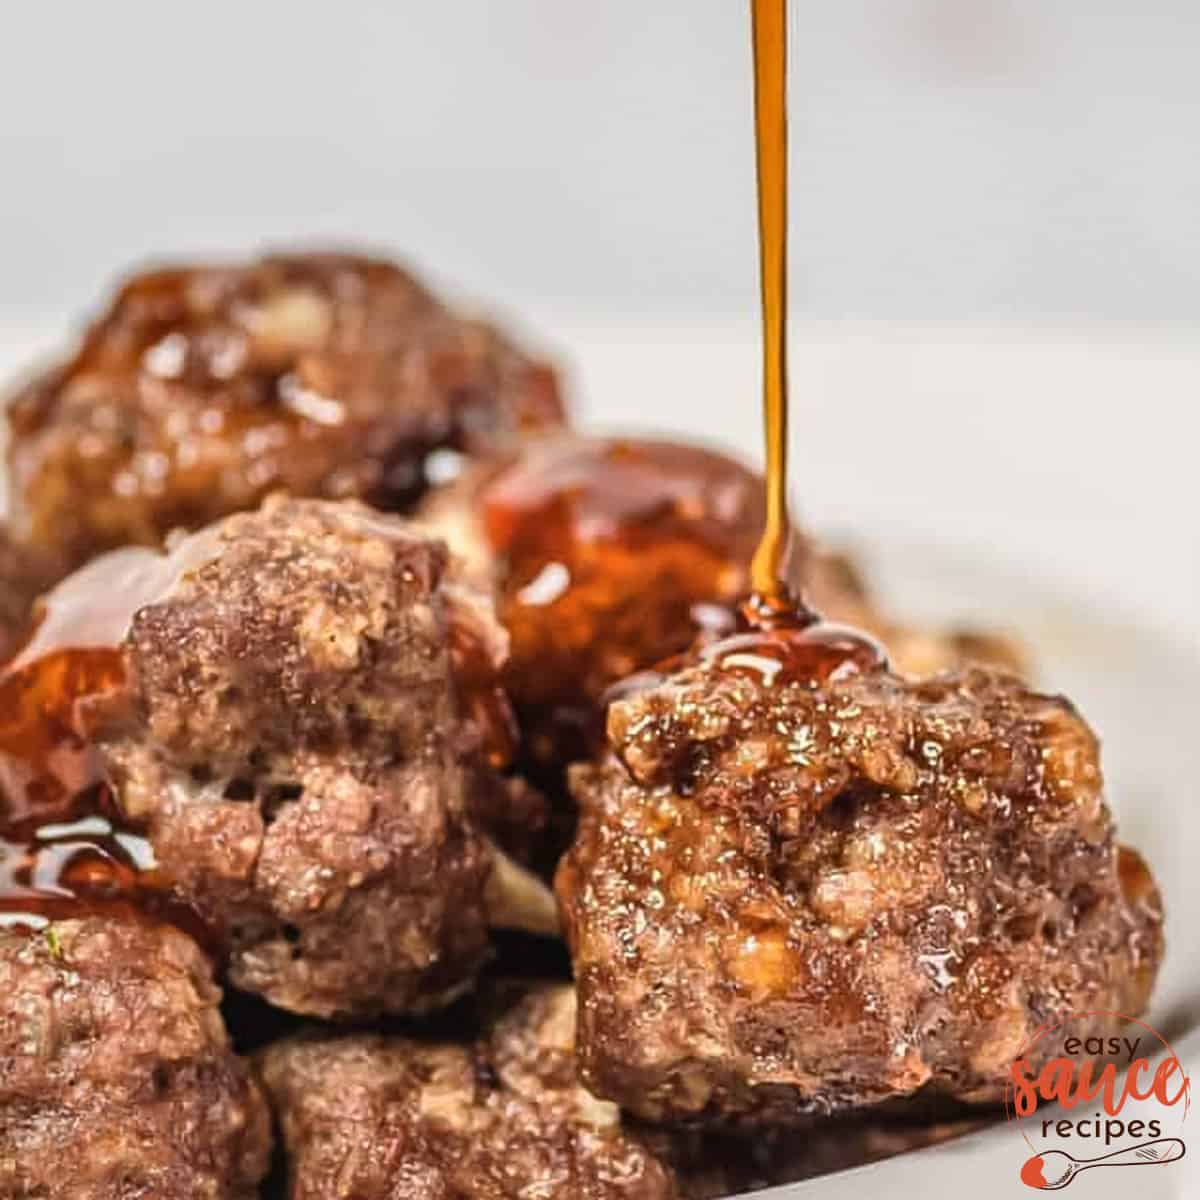 honey sriracha sauce being poured on a pile of meatballs